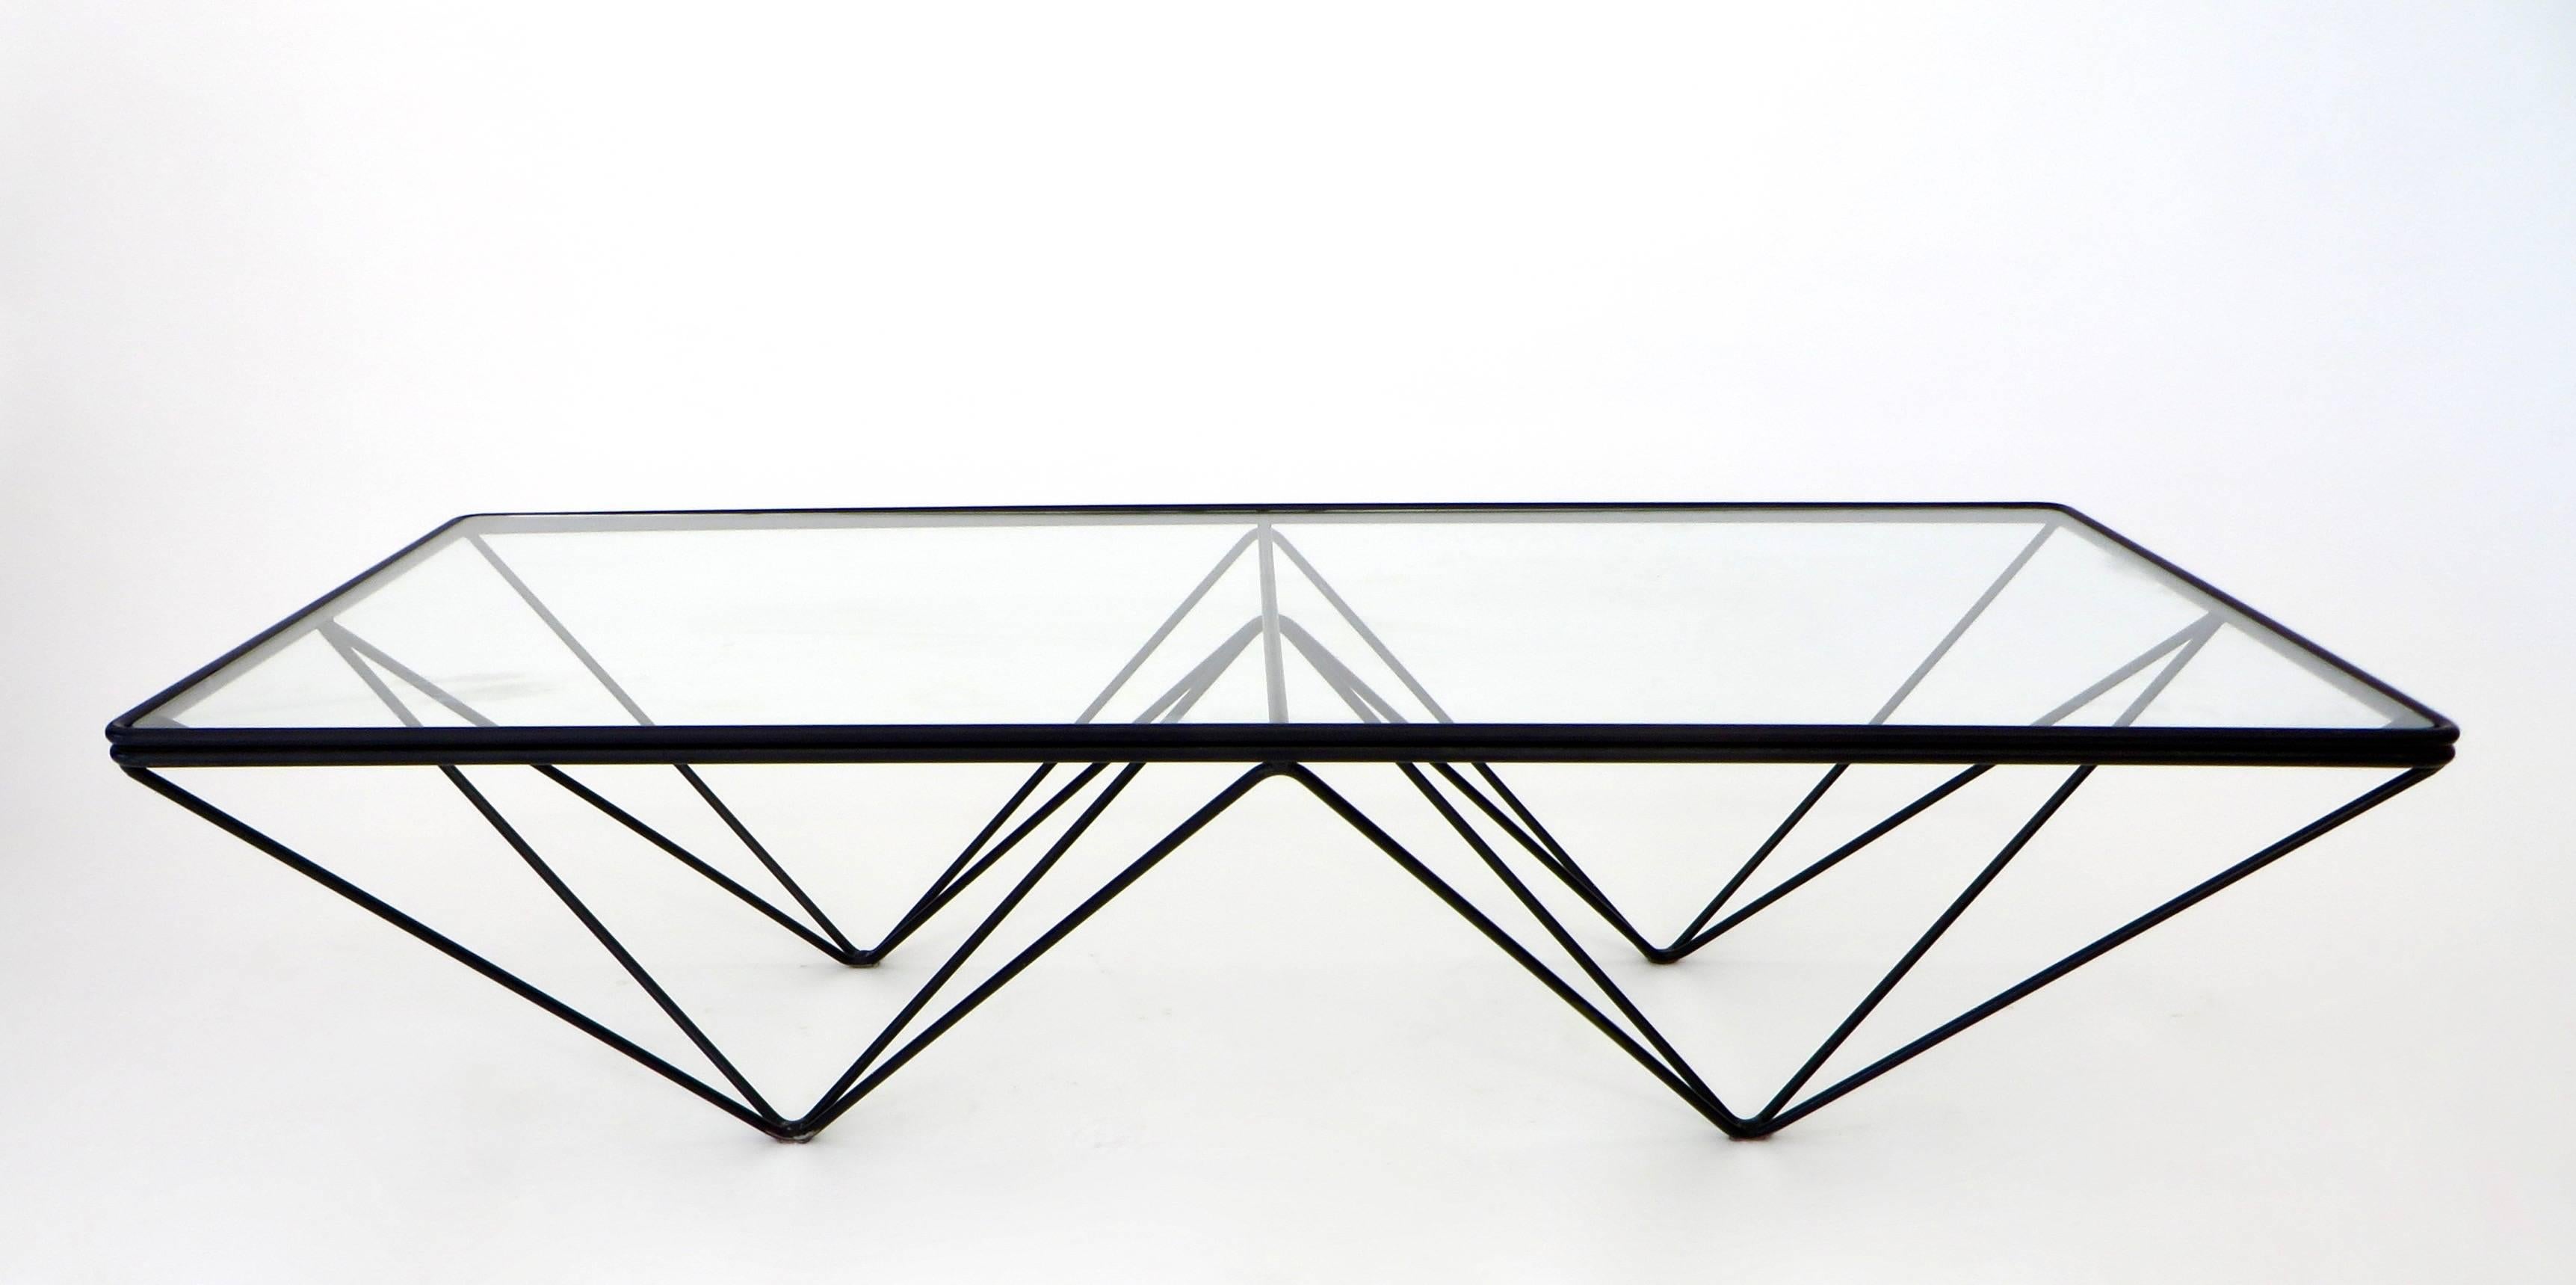 The Alanda low coffee table by Paolo Piva was edition by B&B Italia, circa 1980. Welded enameled double steel rods with a glass top. 
Very graphic table with large glass plateau. Several sizes were designed and produced, no longer in